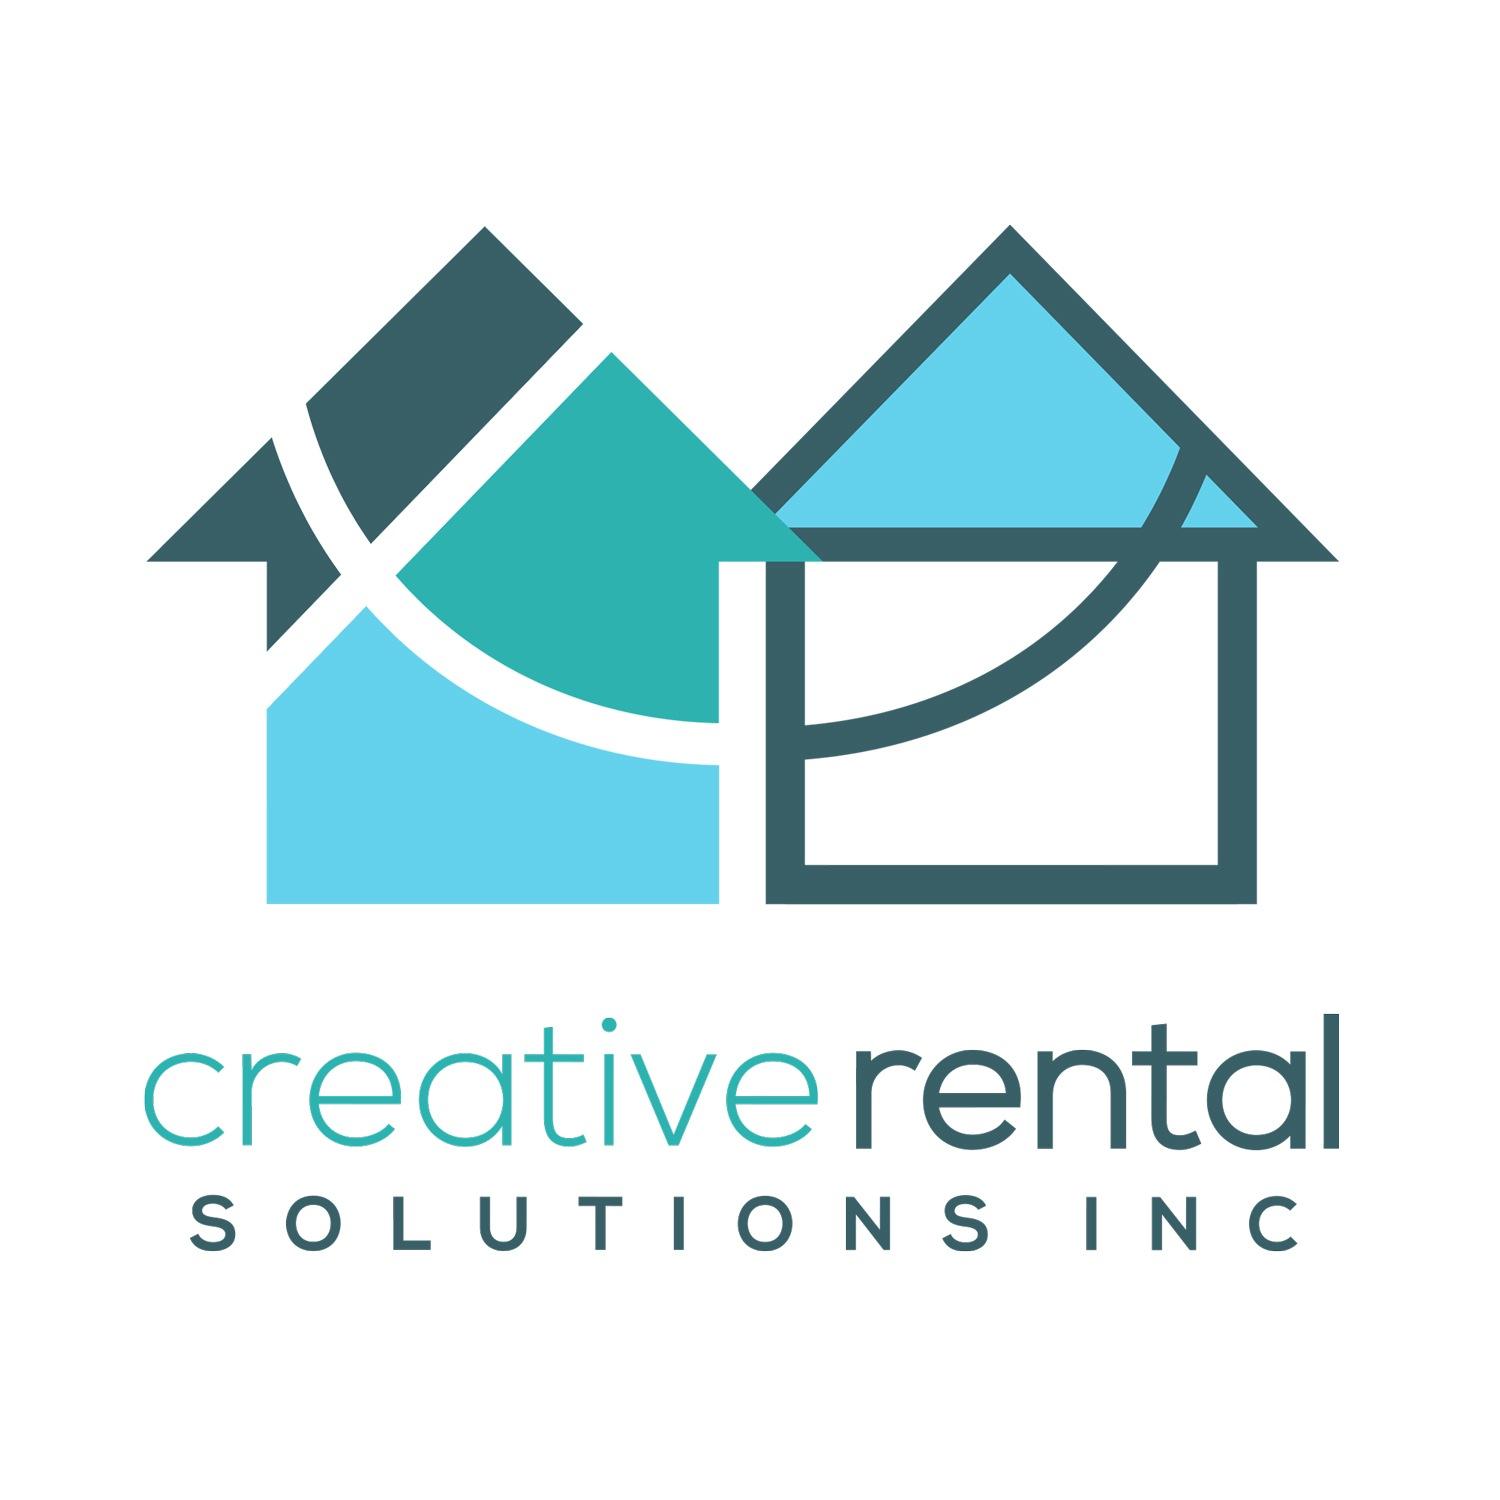 Contemporary&Innovative Relocation + Resideniatial Rental Solutions. Mid to High end home renting /buying /furnishing for professional / exec - short/long term